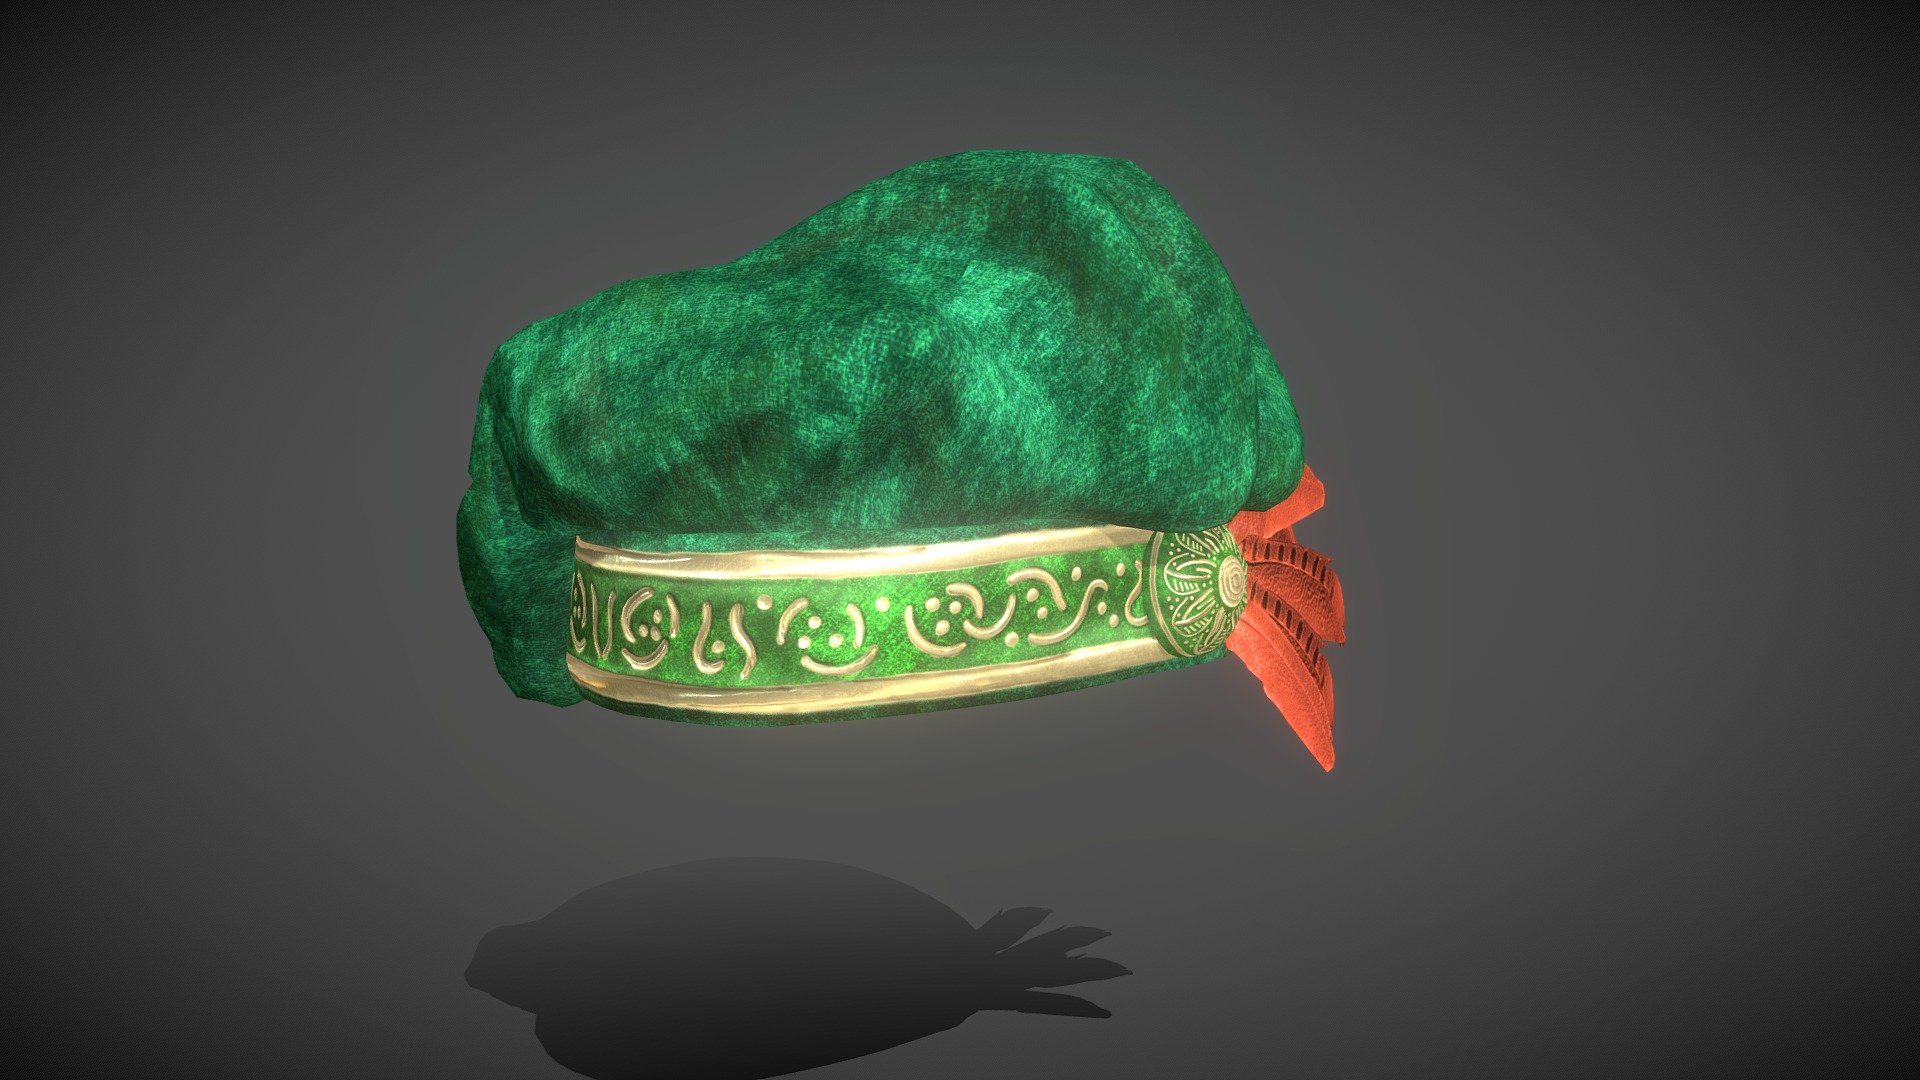 Made for Faes AR an #RPG #AR #Game #app a Italian Hat Style with #zbrush #Maya #substancepainter and #marmoset if you want commission works for games, 3d print or argames I can do it 3d model